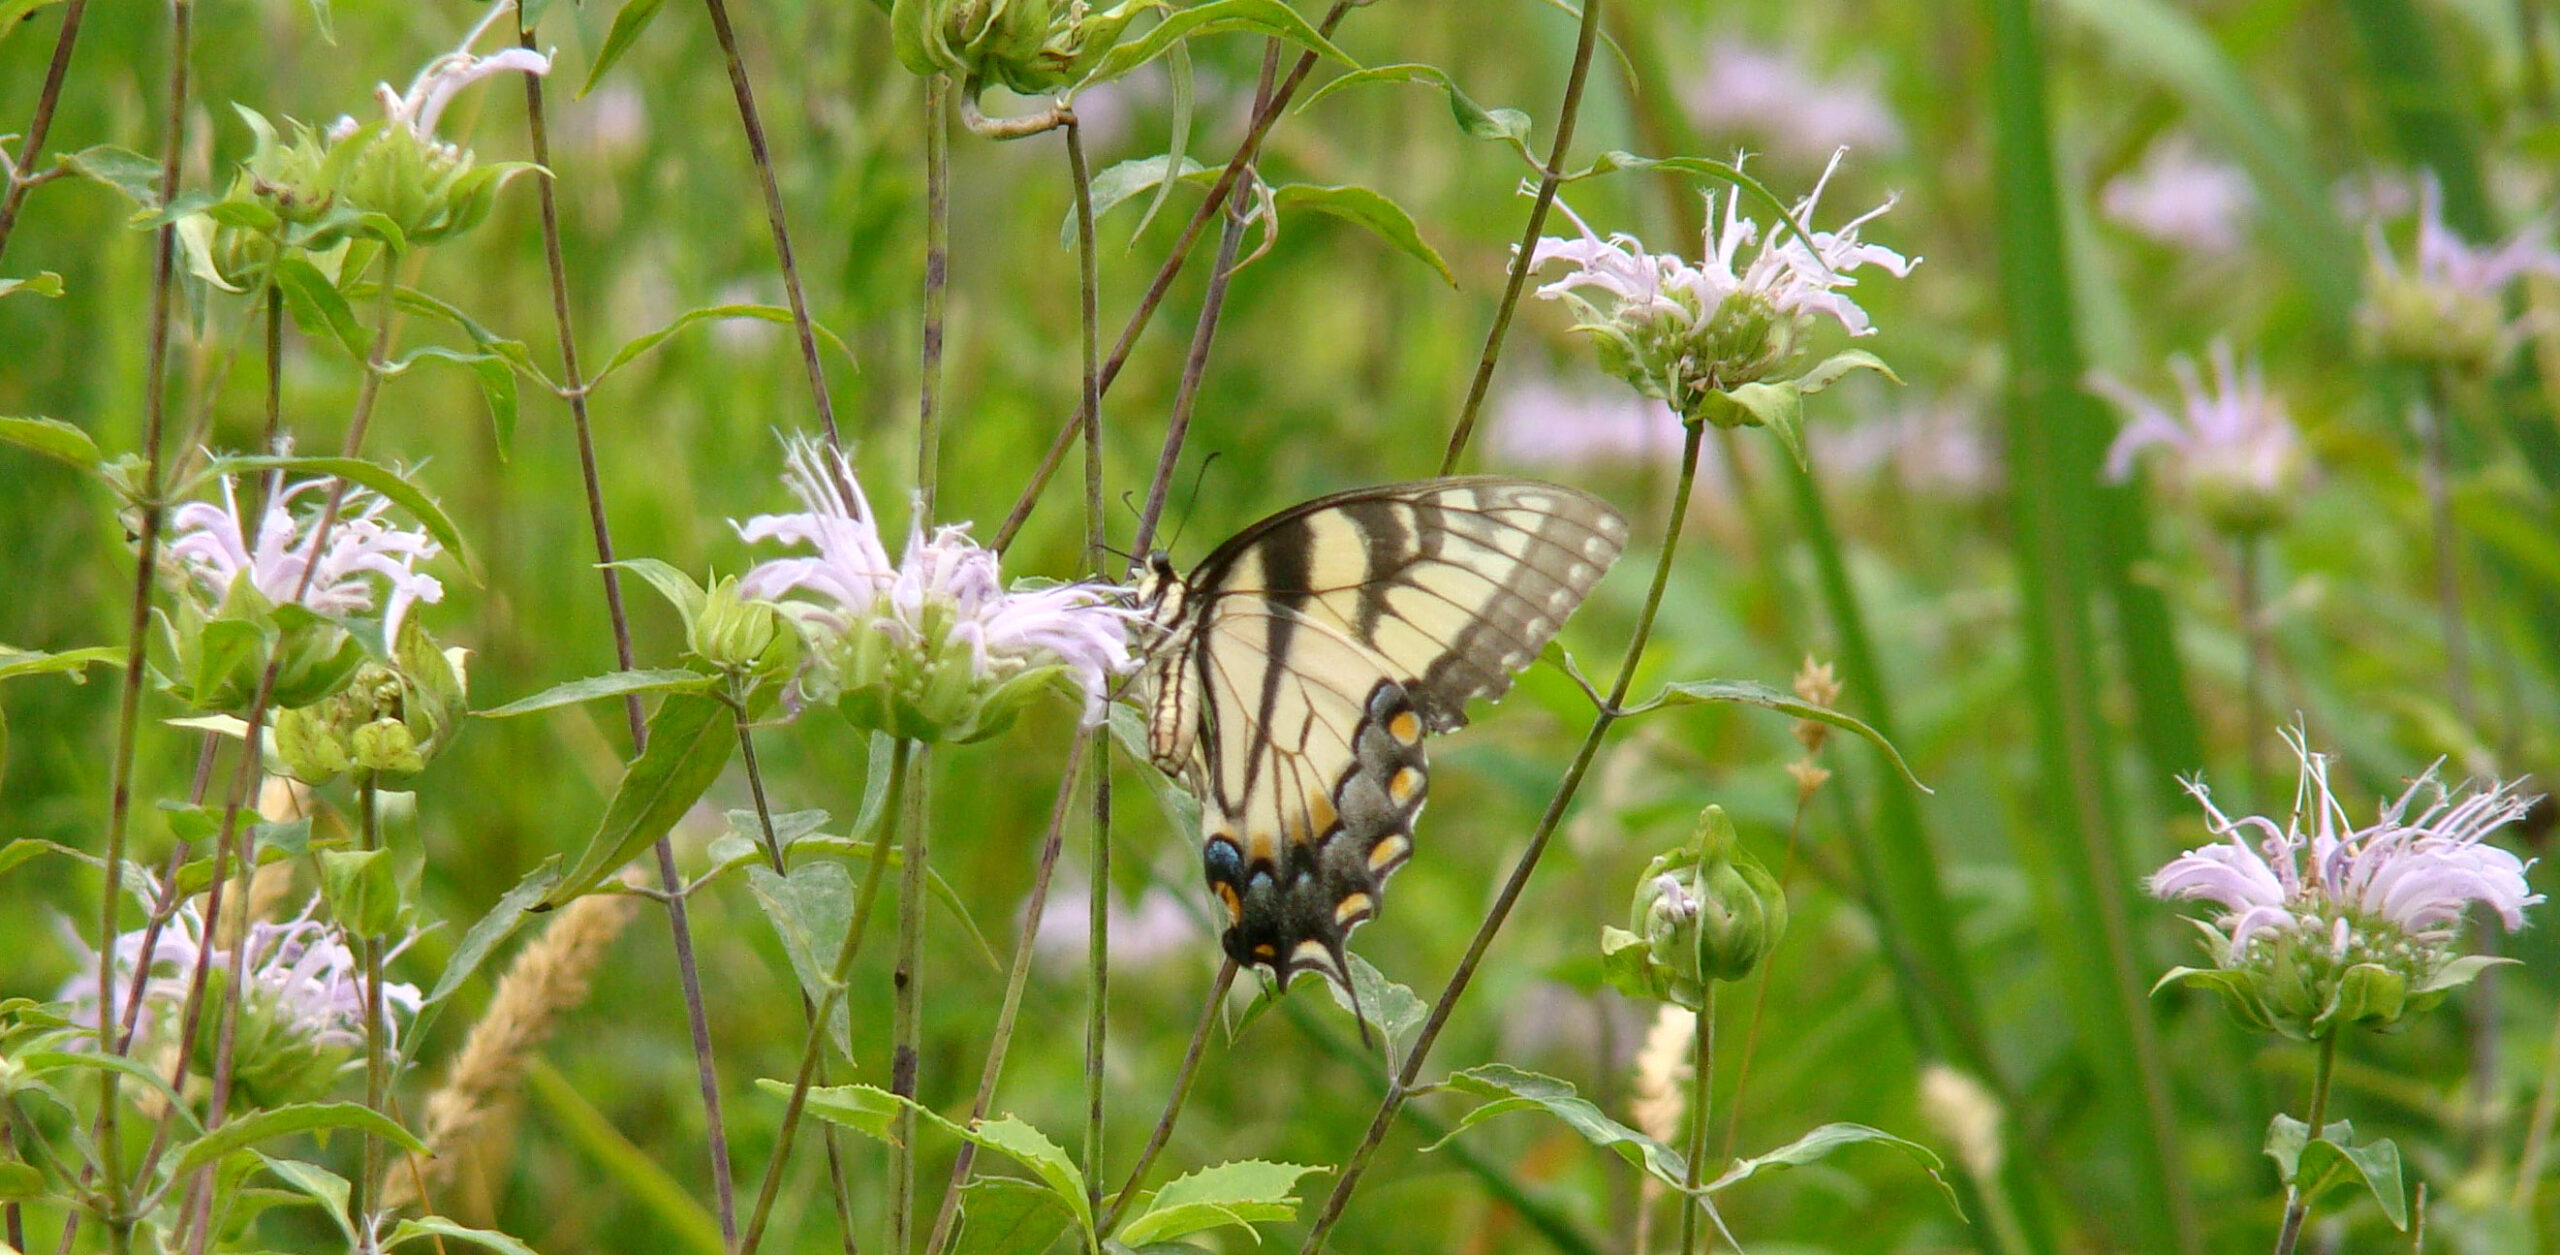 an image of an eastern tiger swallowtail in a flower meadow